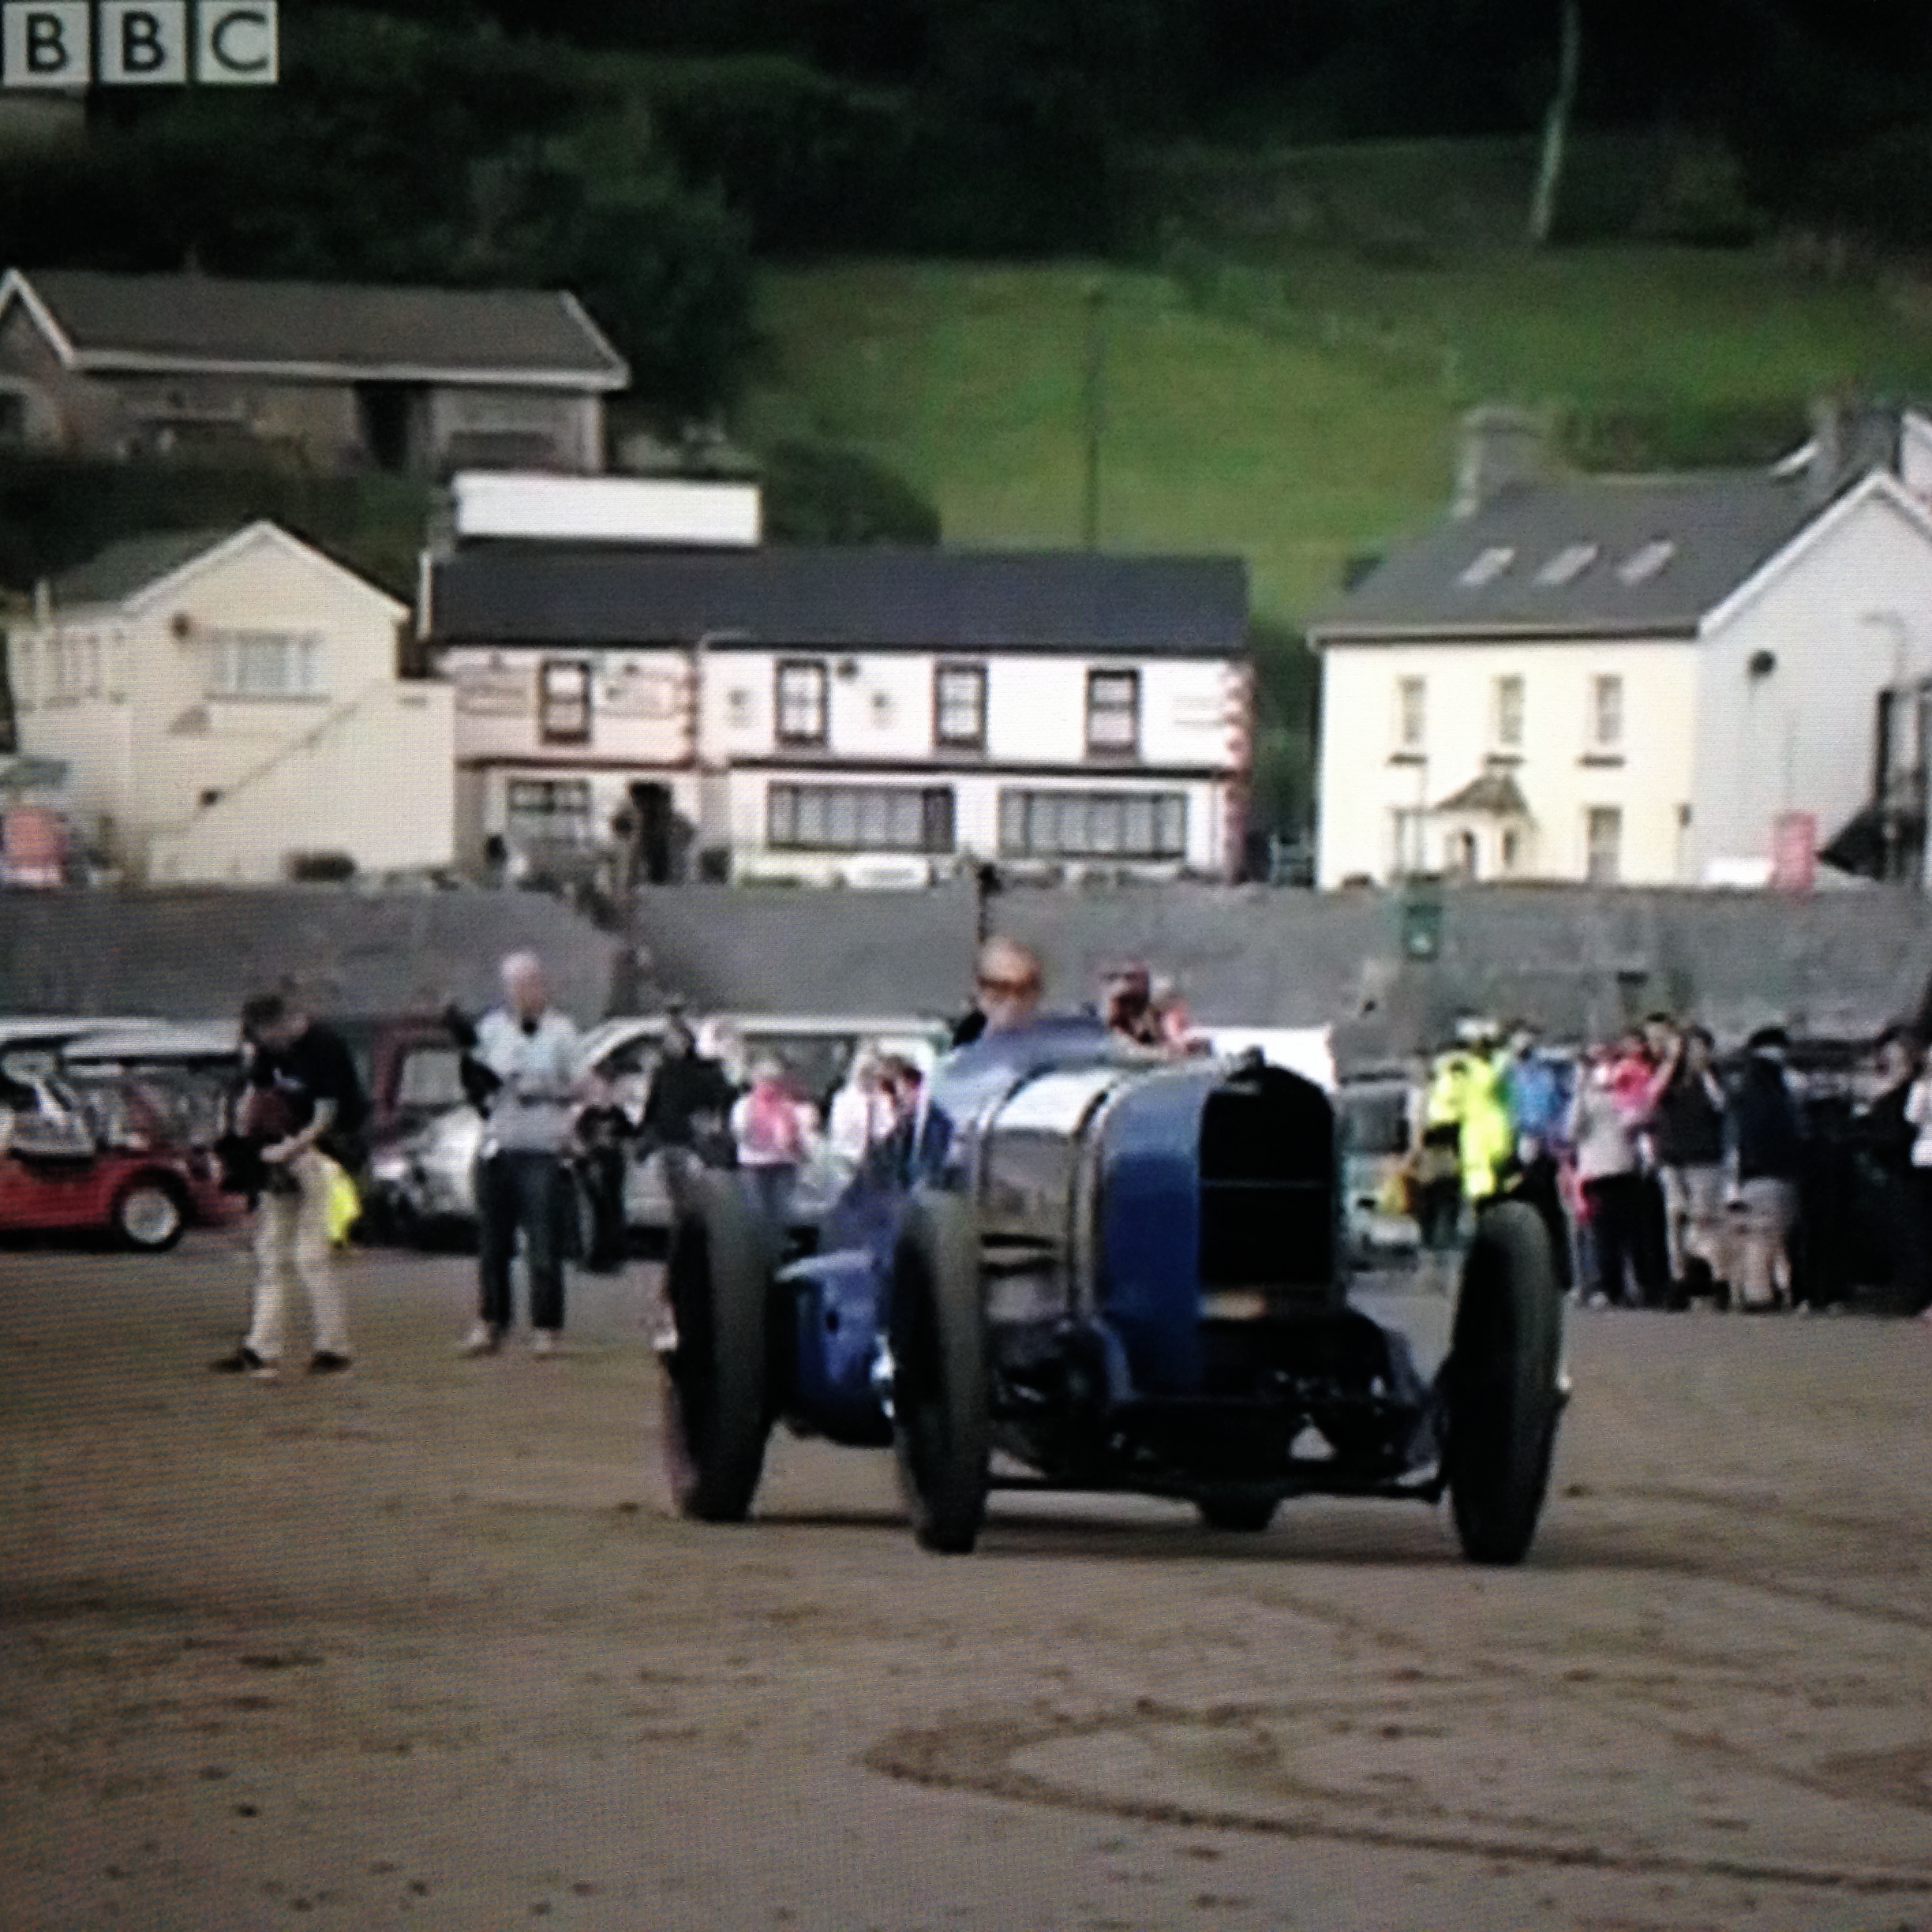 Filming an event on Pendine sands, Wales